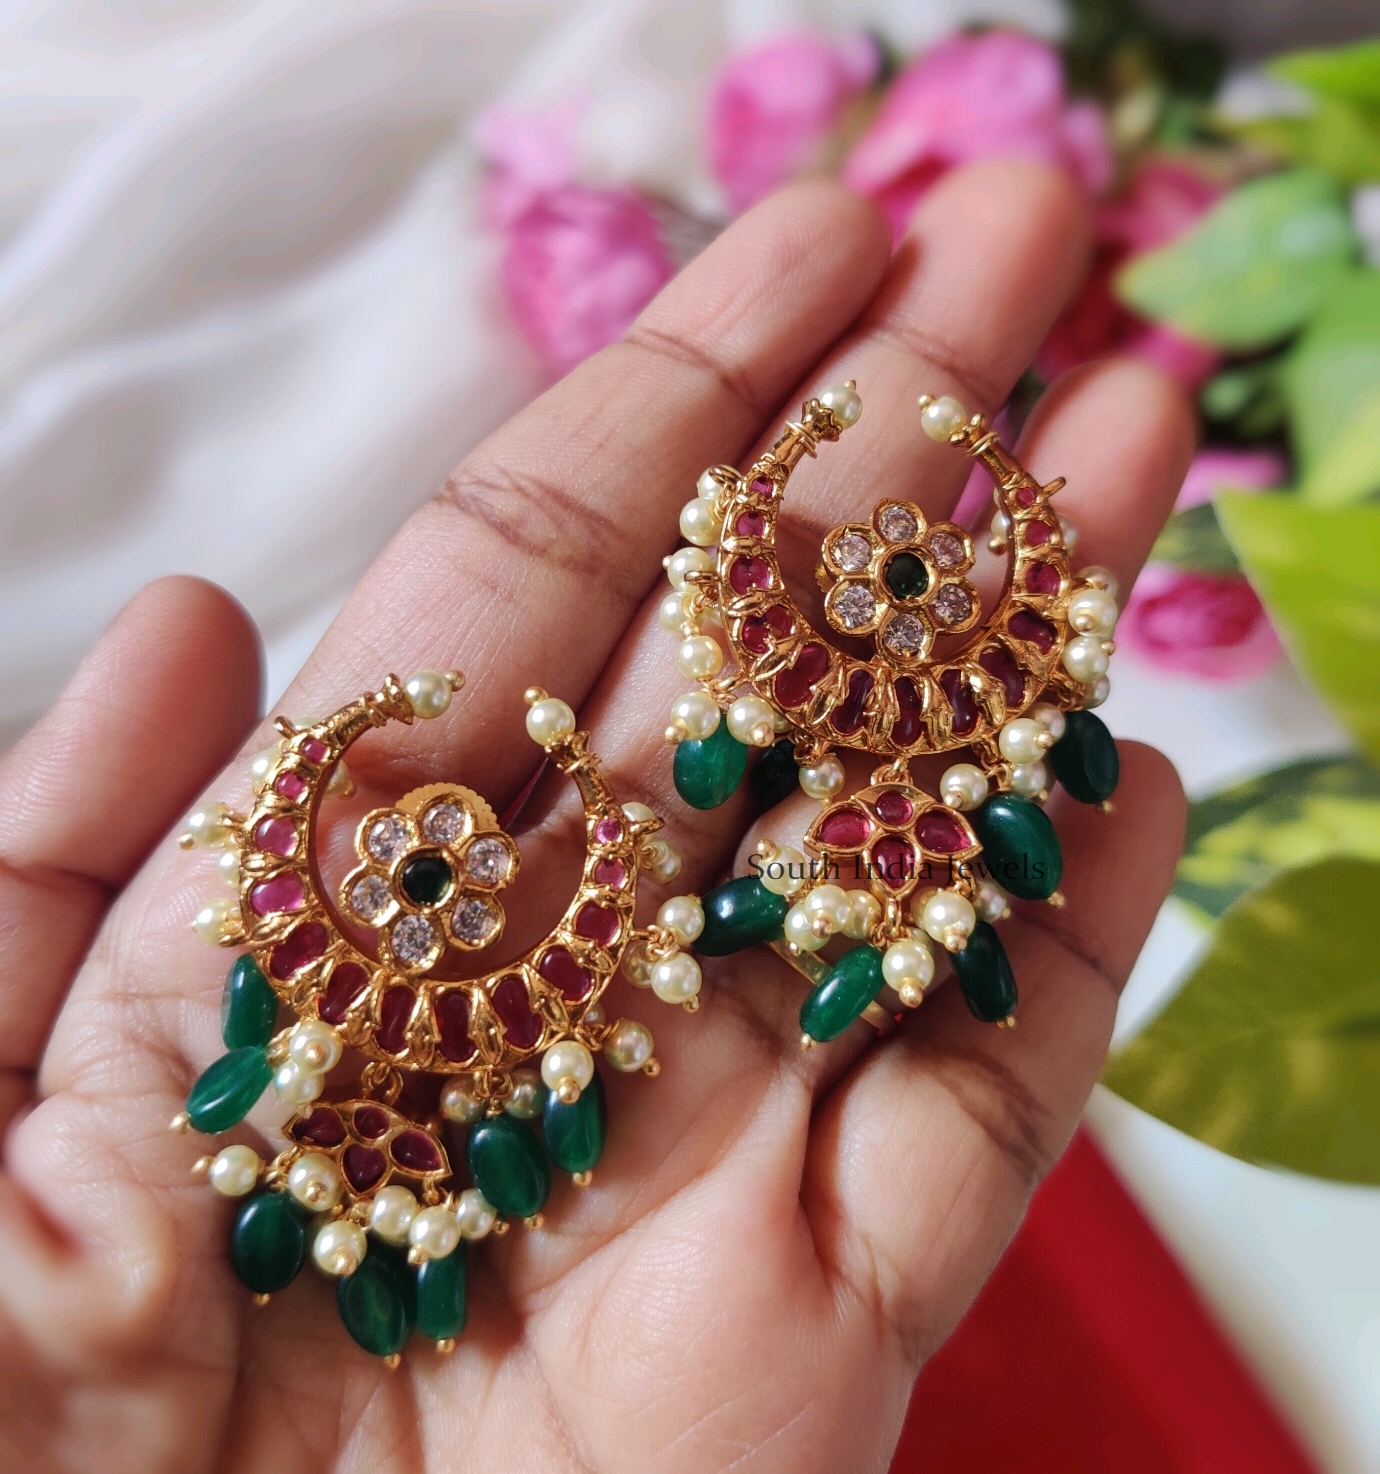 The Royal Affair Studded Dazzling Earrings